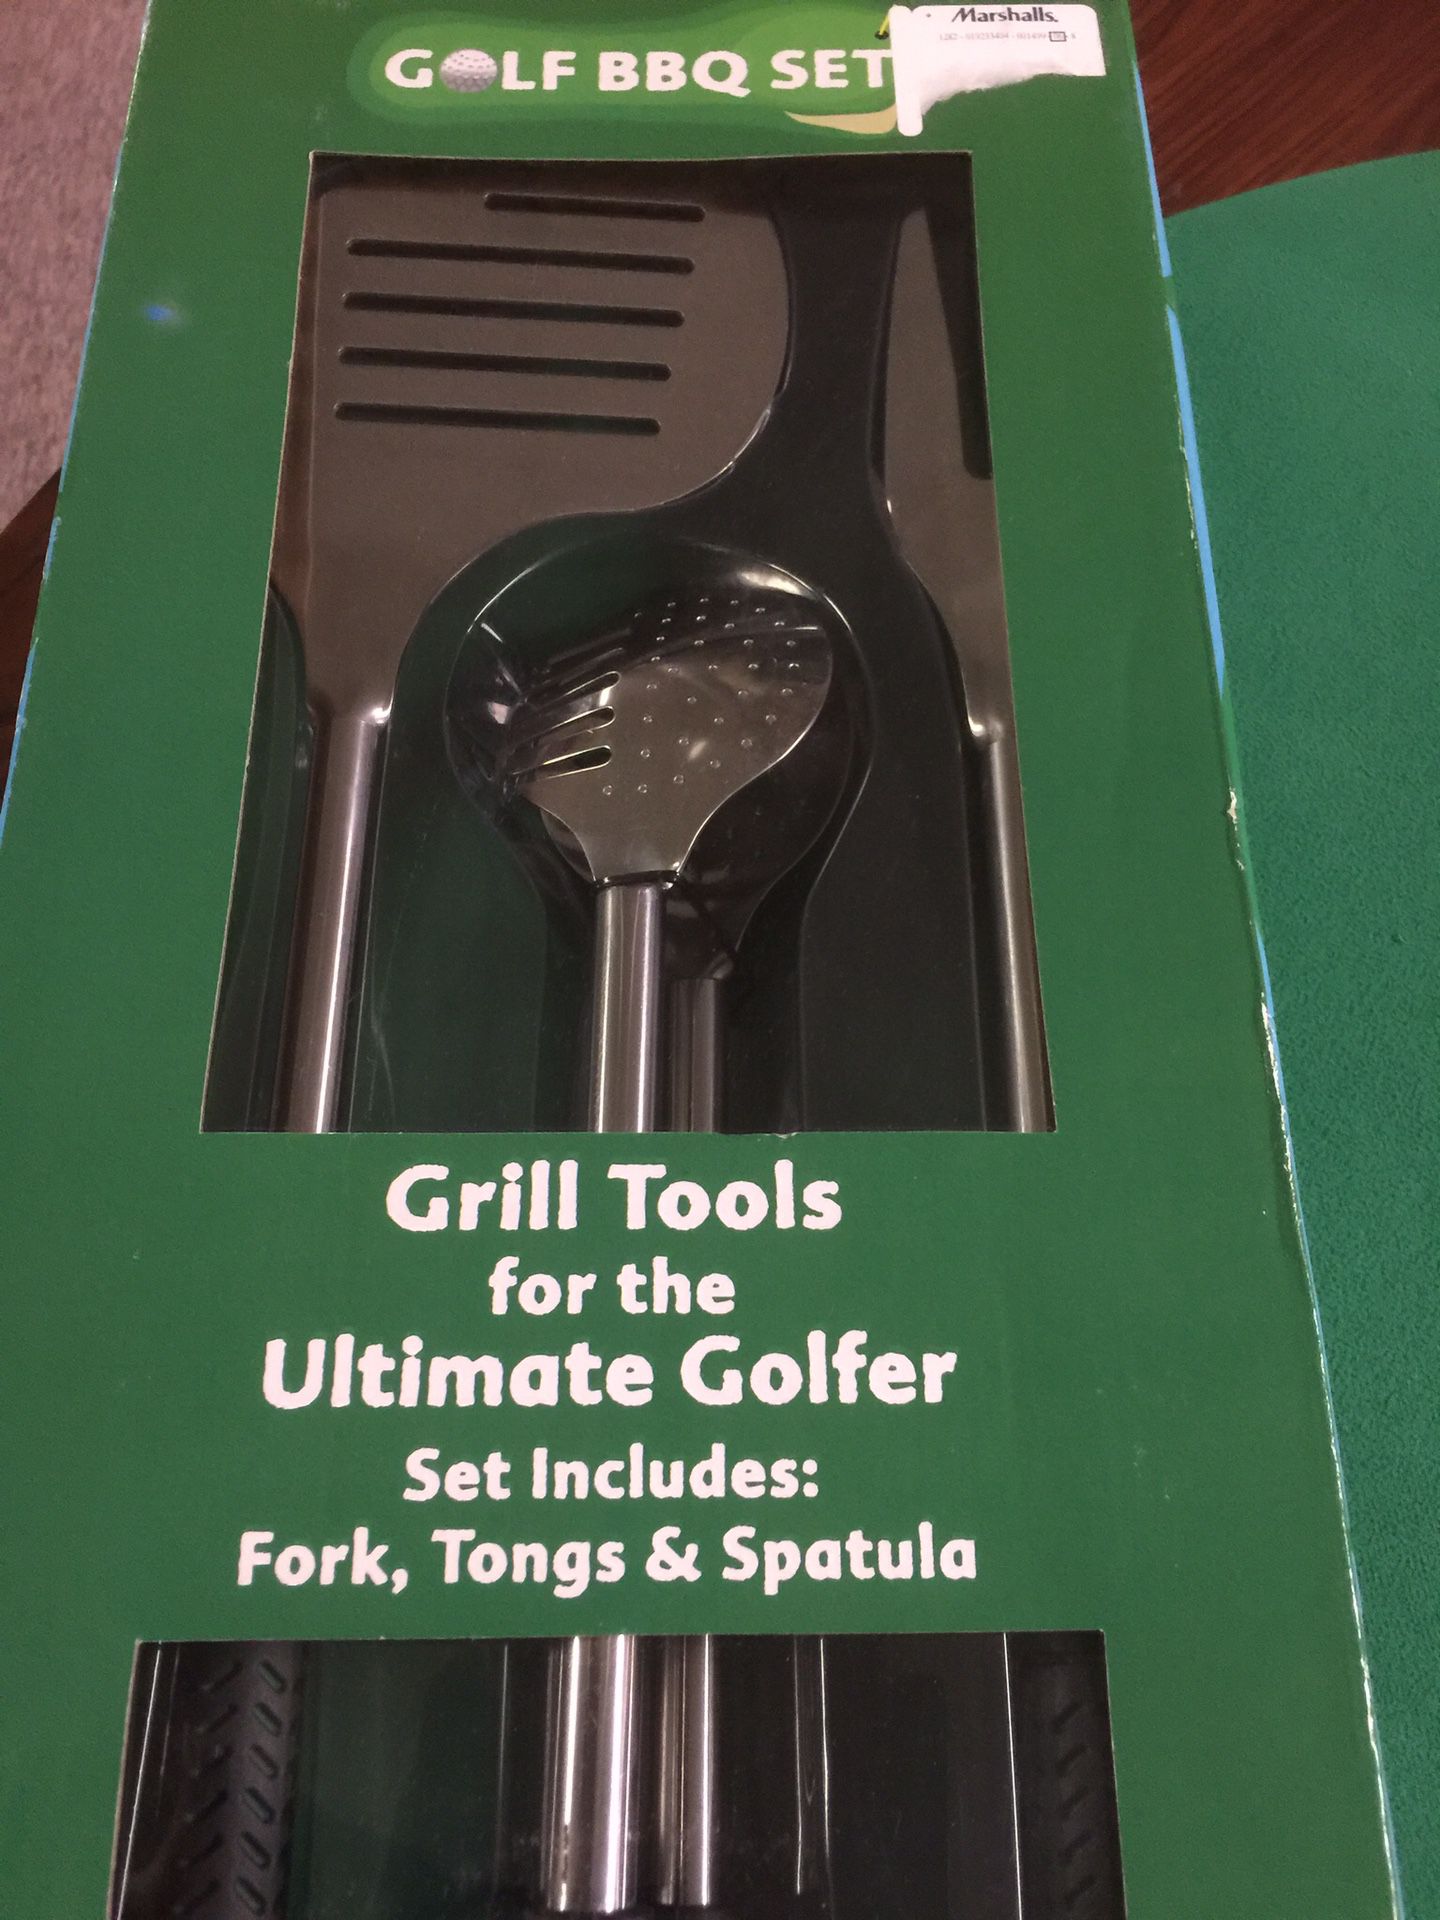 Grill tools for golfer